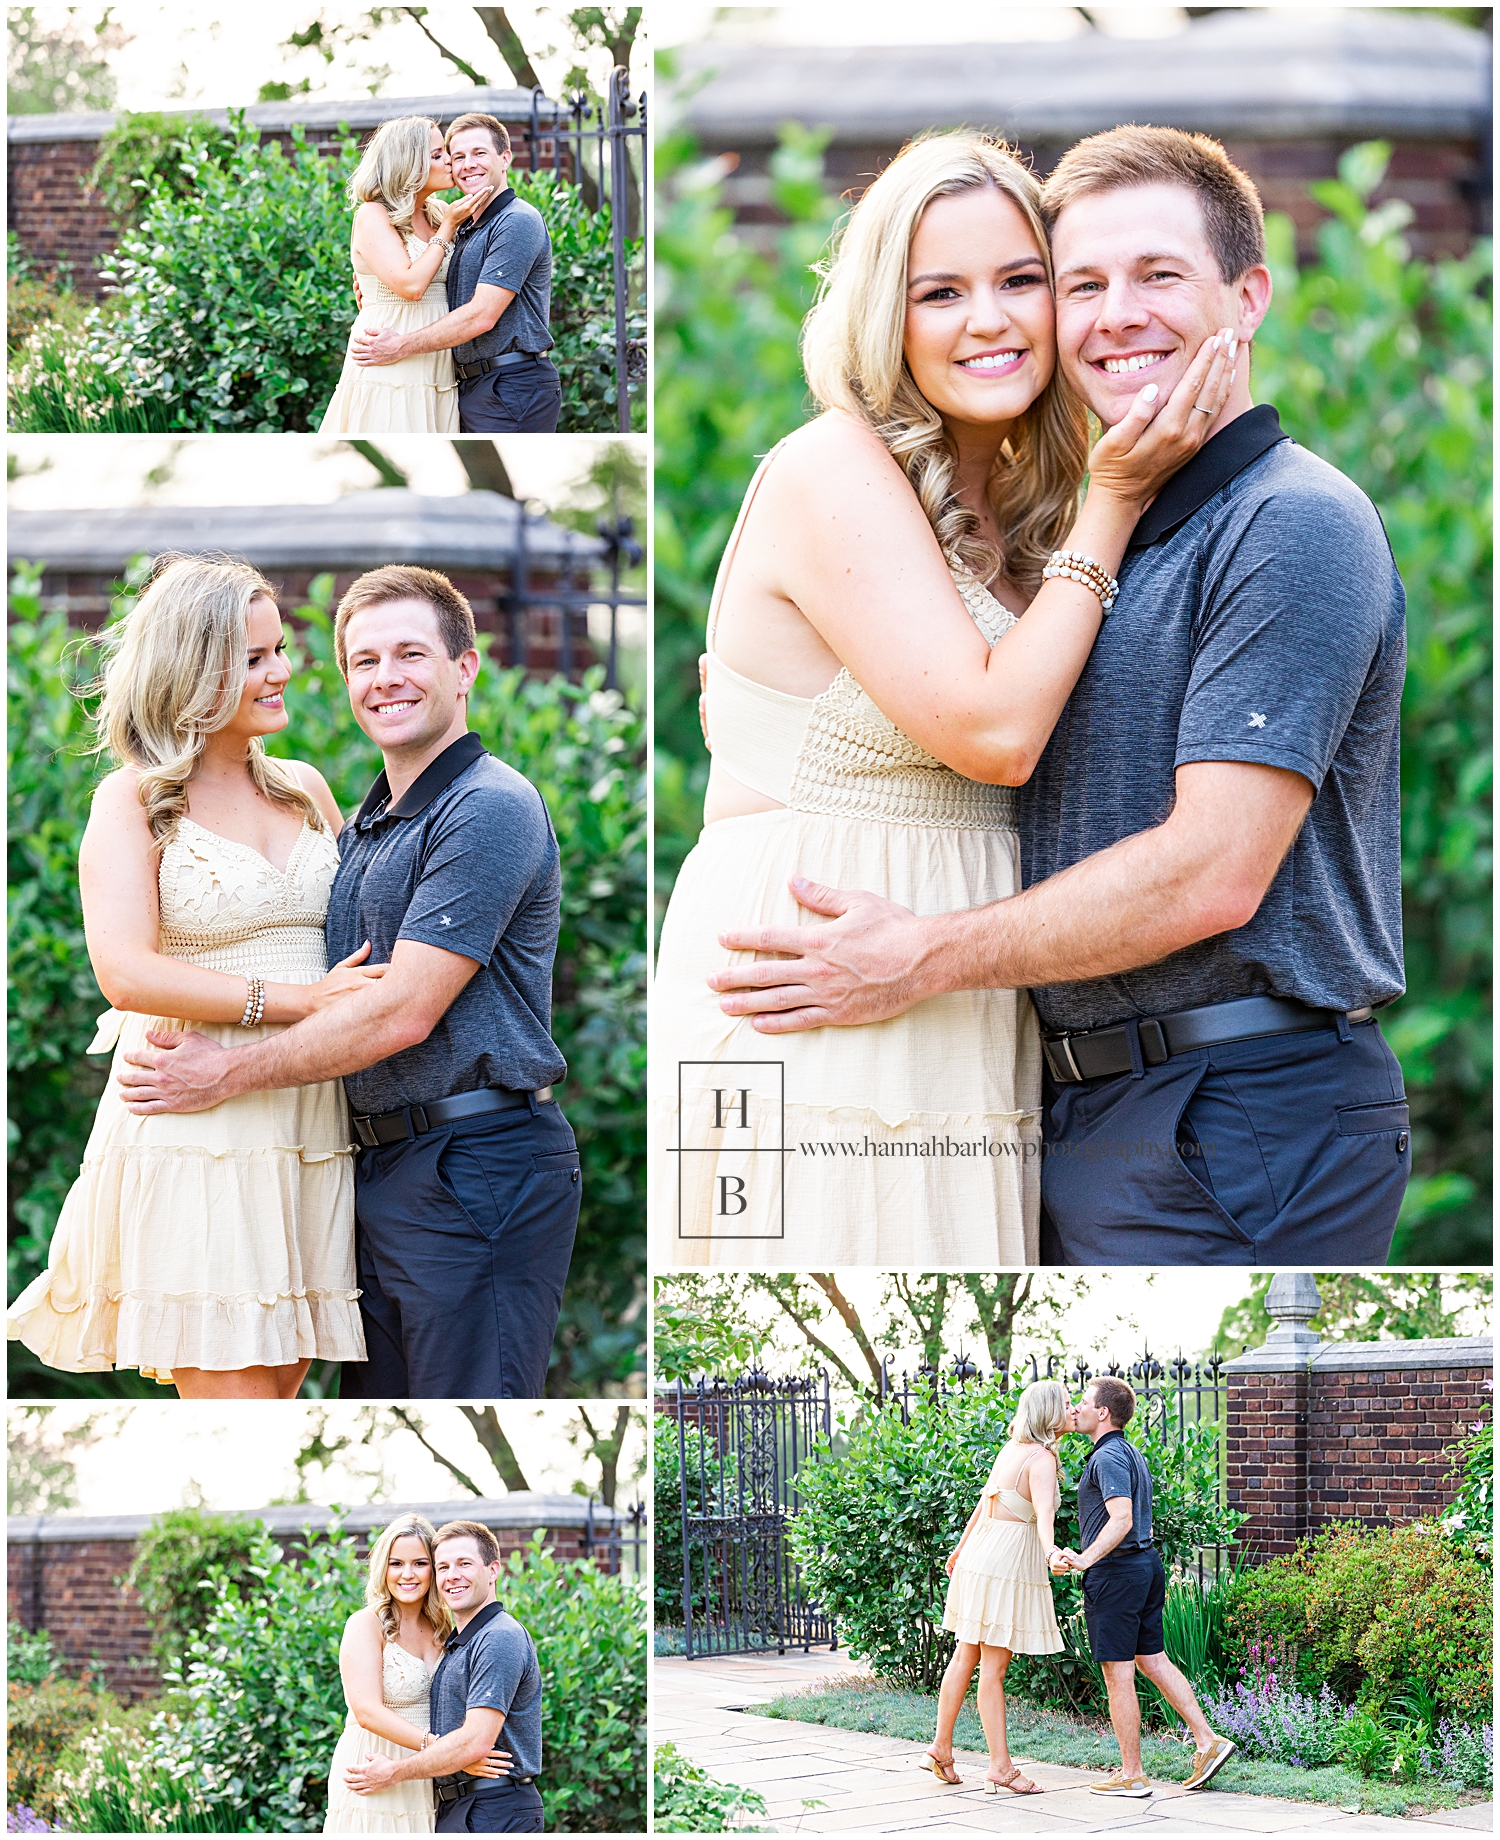 Bride to be embraces fiance for engagement photos.